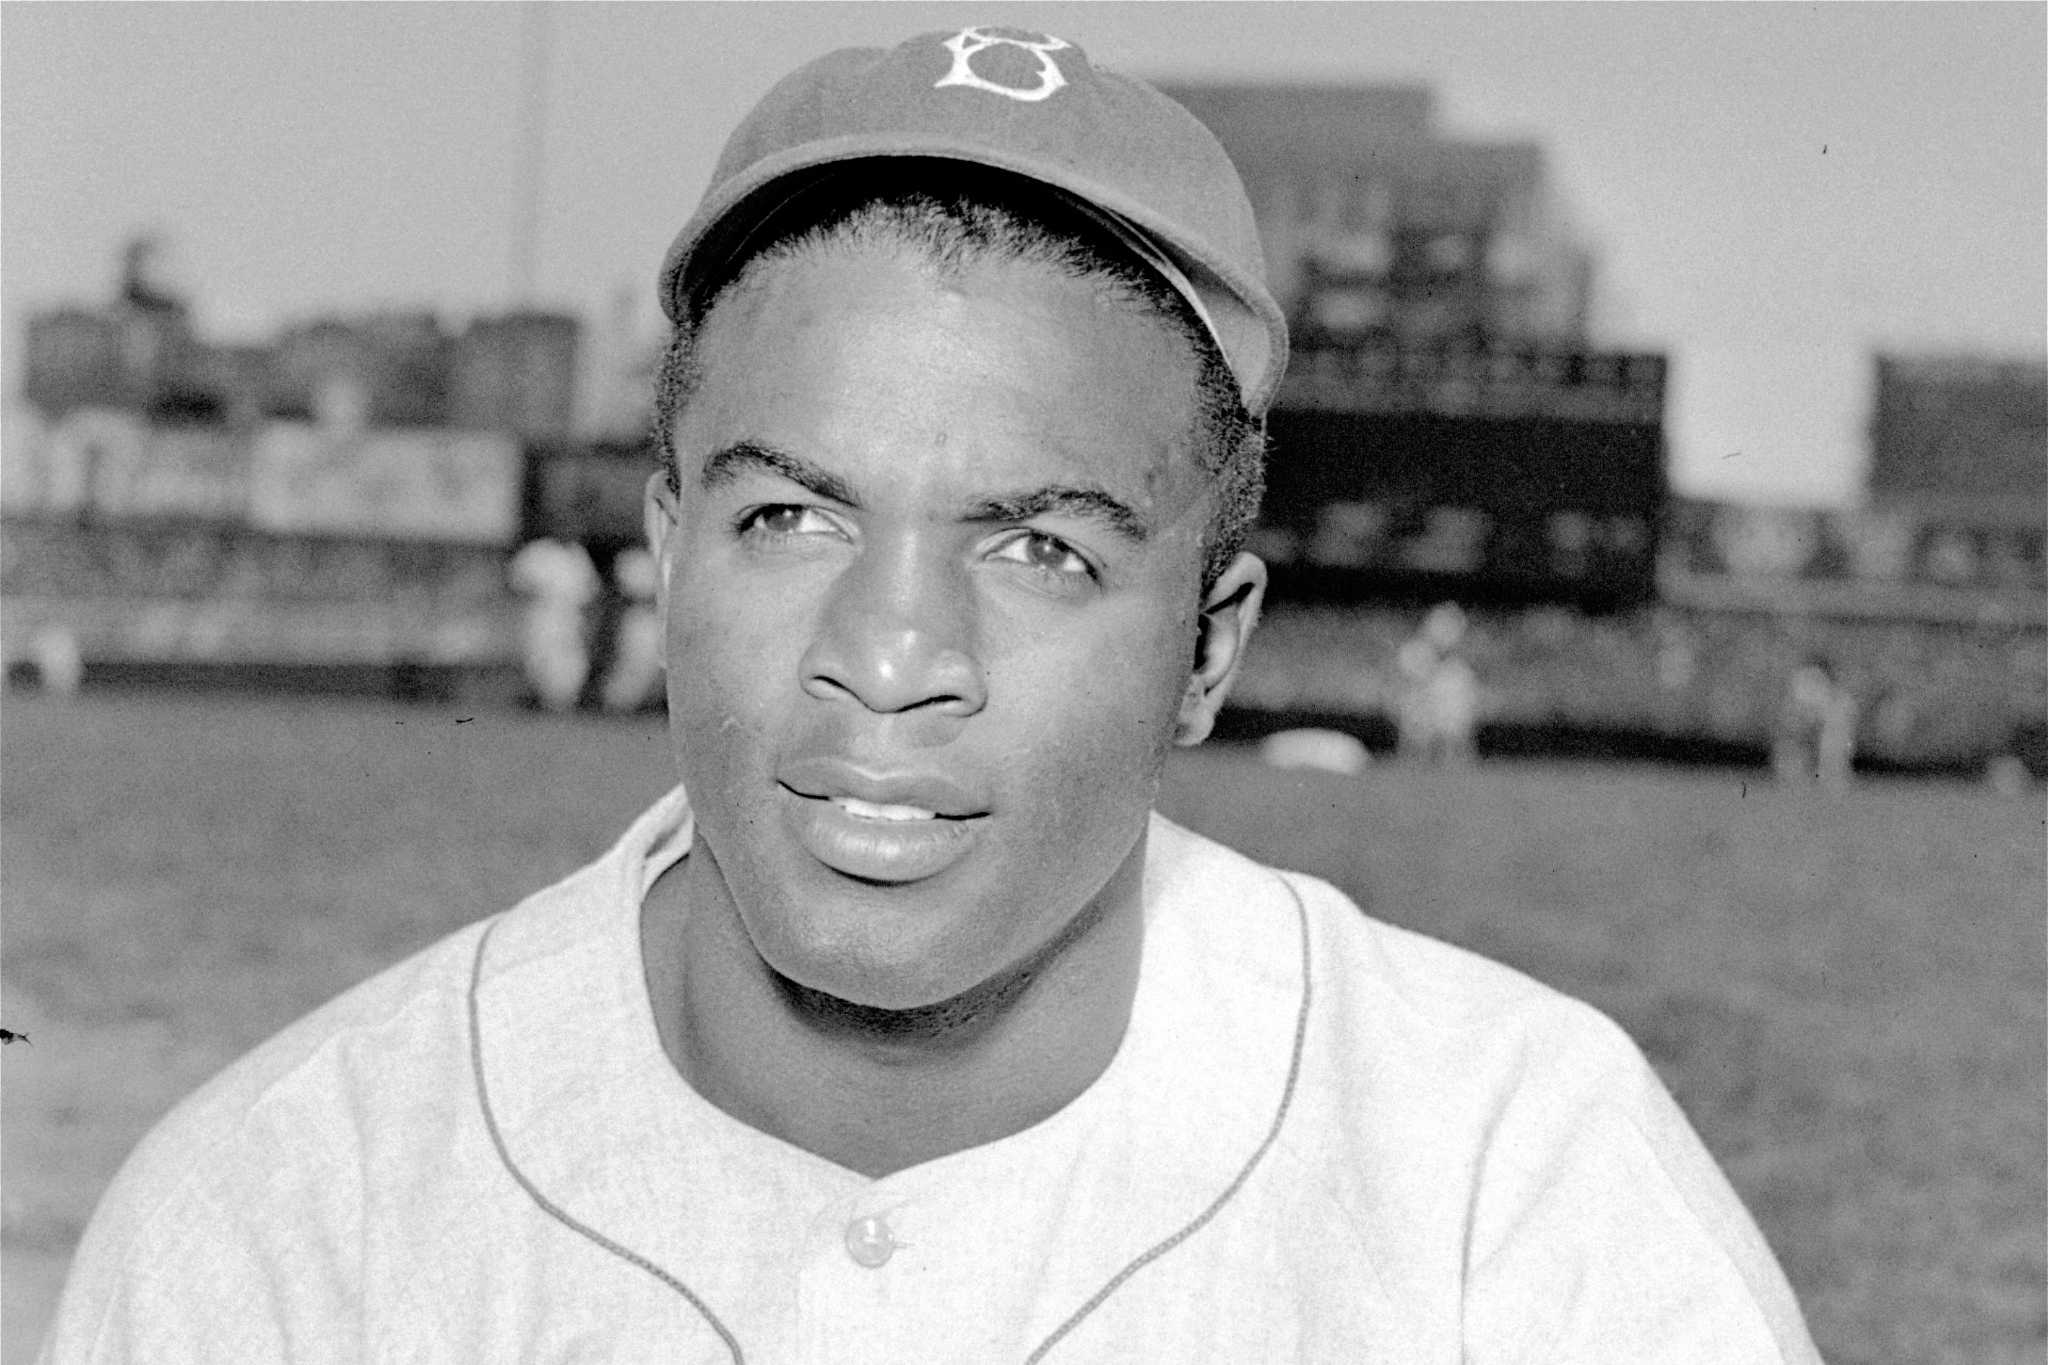 Raise a toast to the legacy of Jackie Robinson, who raised a lot of sand